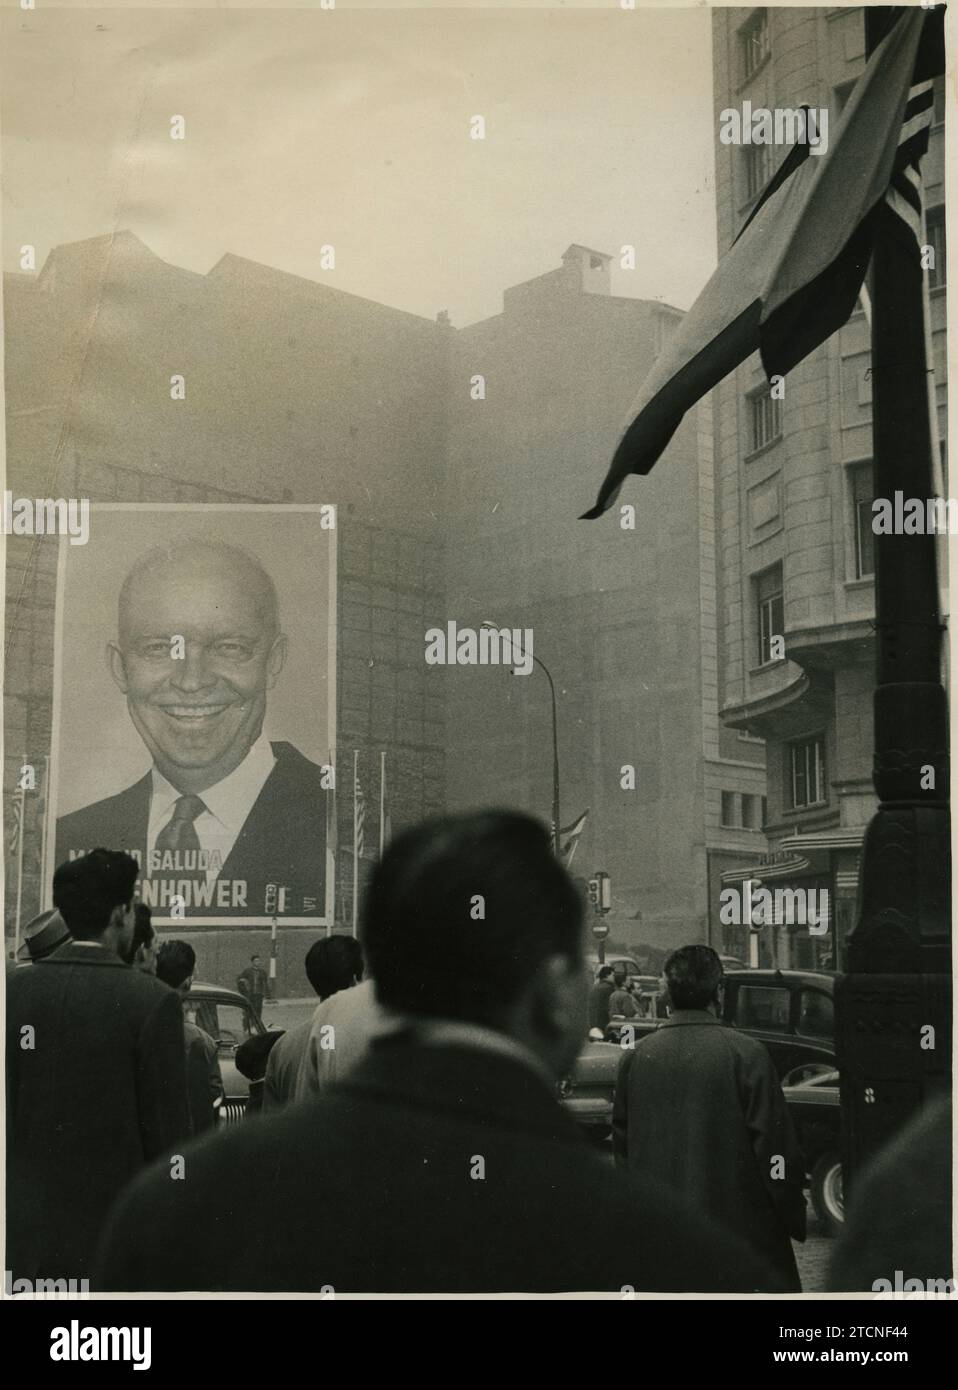 Madrid, 12/20/1959. Preparations for the visit of North American President Dwight D. Eisenhower to Spain, the first by a president of the United States. In the image, one of the enormous posters with portraits of the North American president that were placed along the route that both leaders took in the streets of Madrid, in this case on a lot in the Plaza de España. Credit: Album / Archivo ABC / Enrique Ribas Stock Photo